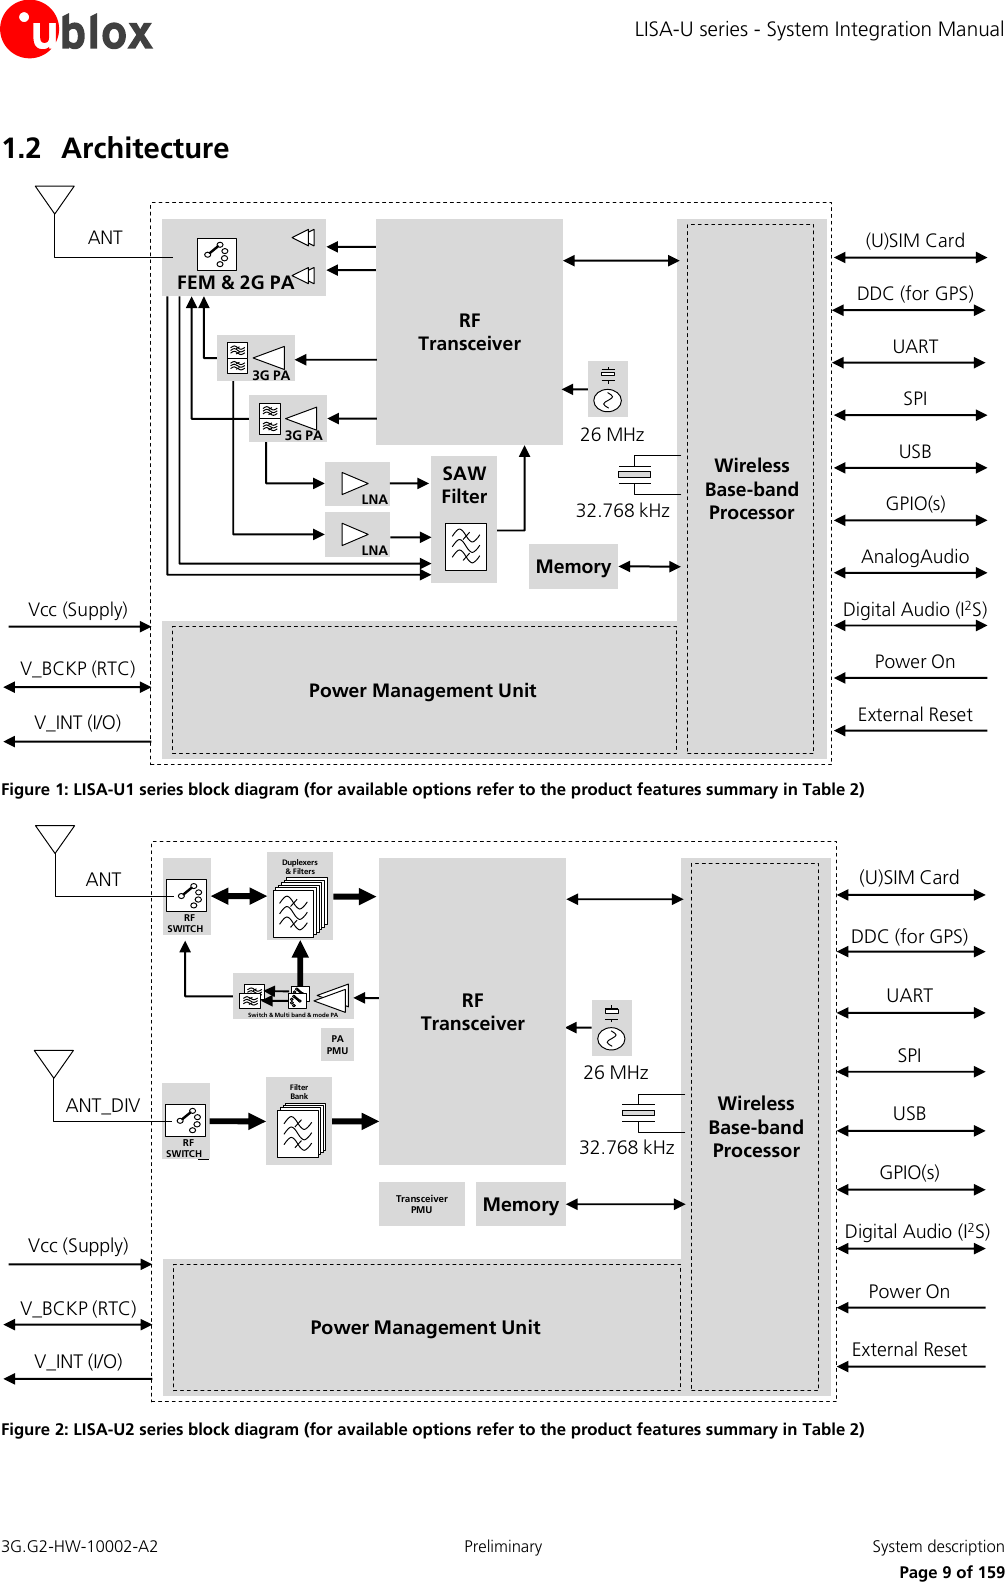 LISA-U series - System Integration Manual 3G.G2-HW-10002-A2  Preliminary  System description      Page 9 of 159 1.2 Architecture WirelessBase-bandProcessorMemoryPower Management UnitRF Transceiver26 MHz32.768 kHzSAWFilterFEM &amp; 2G PAANTLNA3G PALNA3G PADDC (for GPS)(U)SIM CardUARTSPIUSBGPIO(s)Power OnExternal ResetV_BCKP (RTC)Vcc (Supply)V_INT (I/O)Digital Audio (I2S)AnalogAudio Figure 1: LISA-U1 series block diagram (for available options refer to the product features summary in Table 2) WirelessBase-bandProcessorMemoryPower Management Unit26 MHz32.768 kHzANTSwitch &amp; Multi band &amp; mode PADDC (for GPS)(U)SIM CardUARTSPIUSBGPIO(s)Power OnExternal ResetV_BCKP (RTC)Vcc (Supply)V_INT (I/O)Digital Audio (I2S)RFSWITCHRF TransceiverDuplexers&amp; FiltersANT_DIVRFSWITCHFilterBankPA PMUTransceiver PMU Figure 2: LISA-U2 series block diagram (for available options refer to the product features summary in Table 2)  